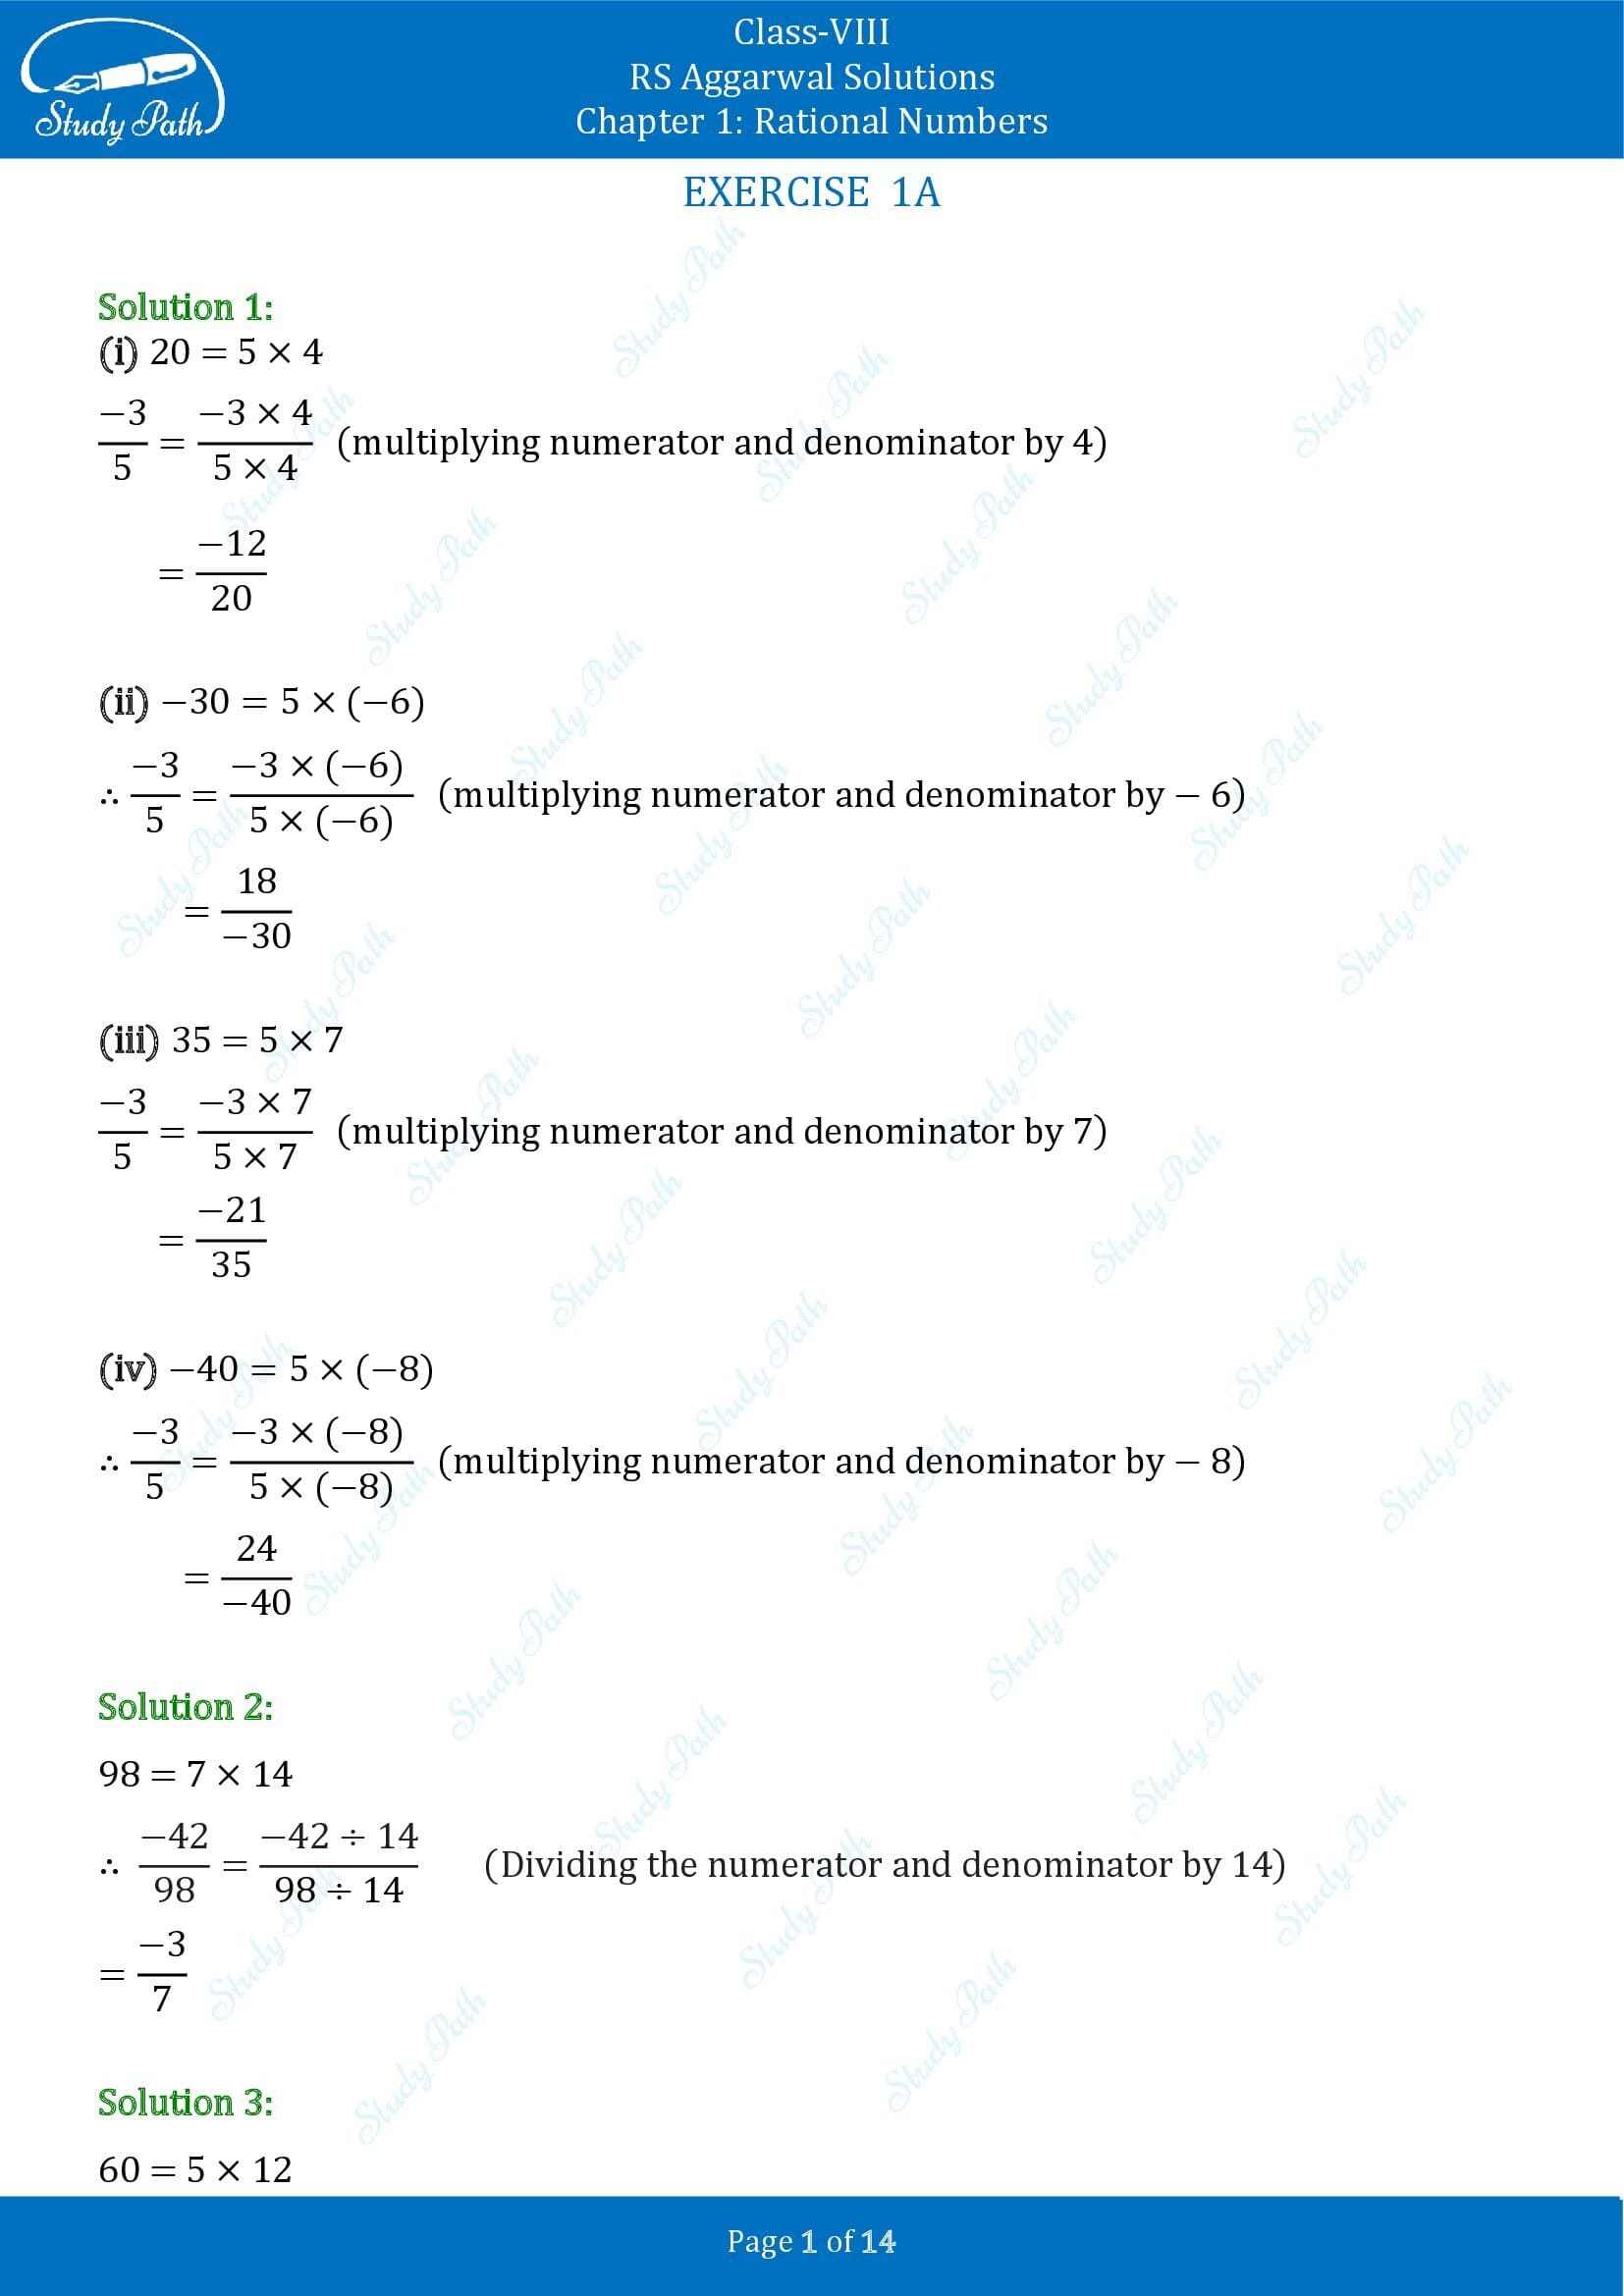 RS Aggarwal Solutions Class 8 Chapter 1 Rational Numbers Exercise 1A 00001